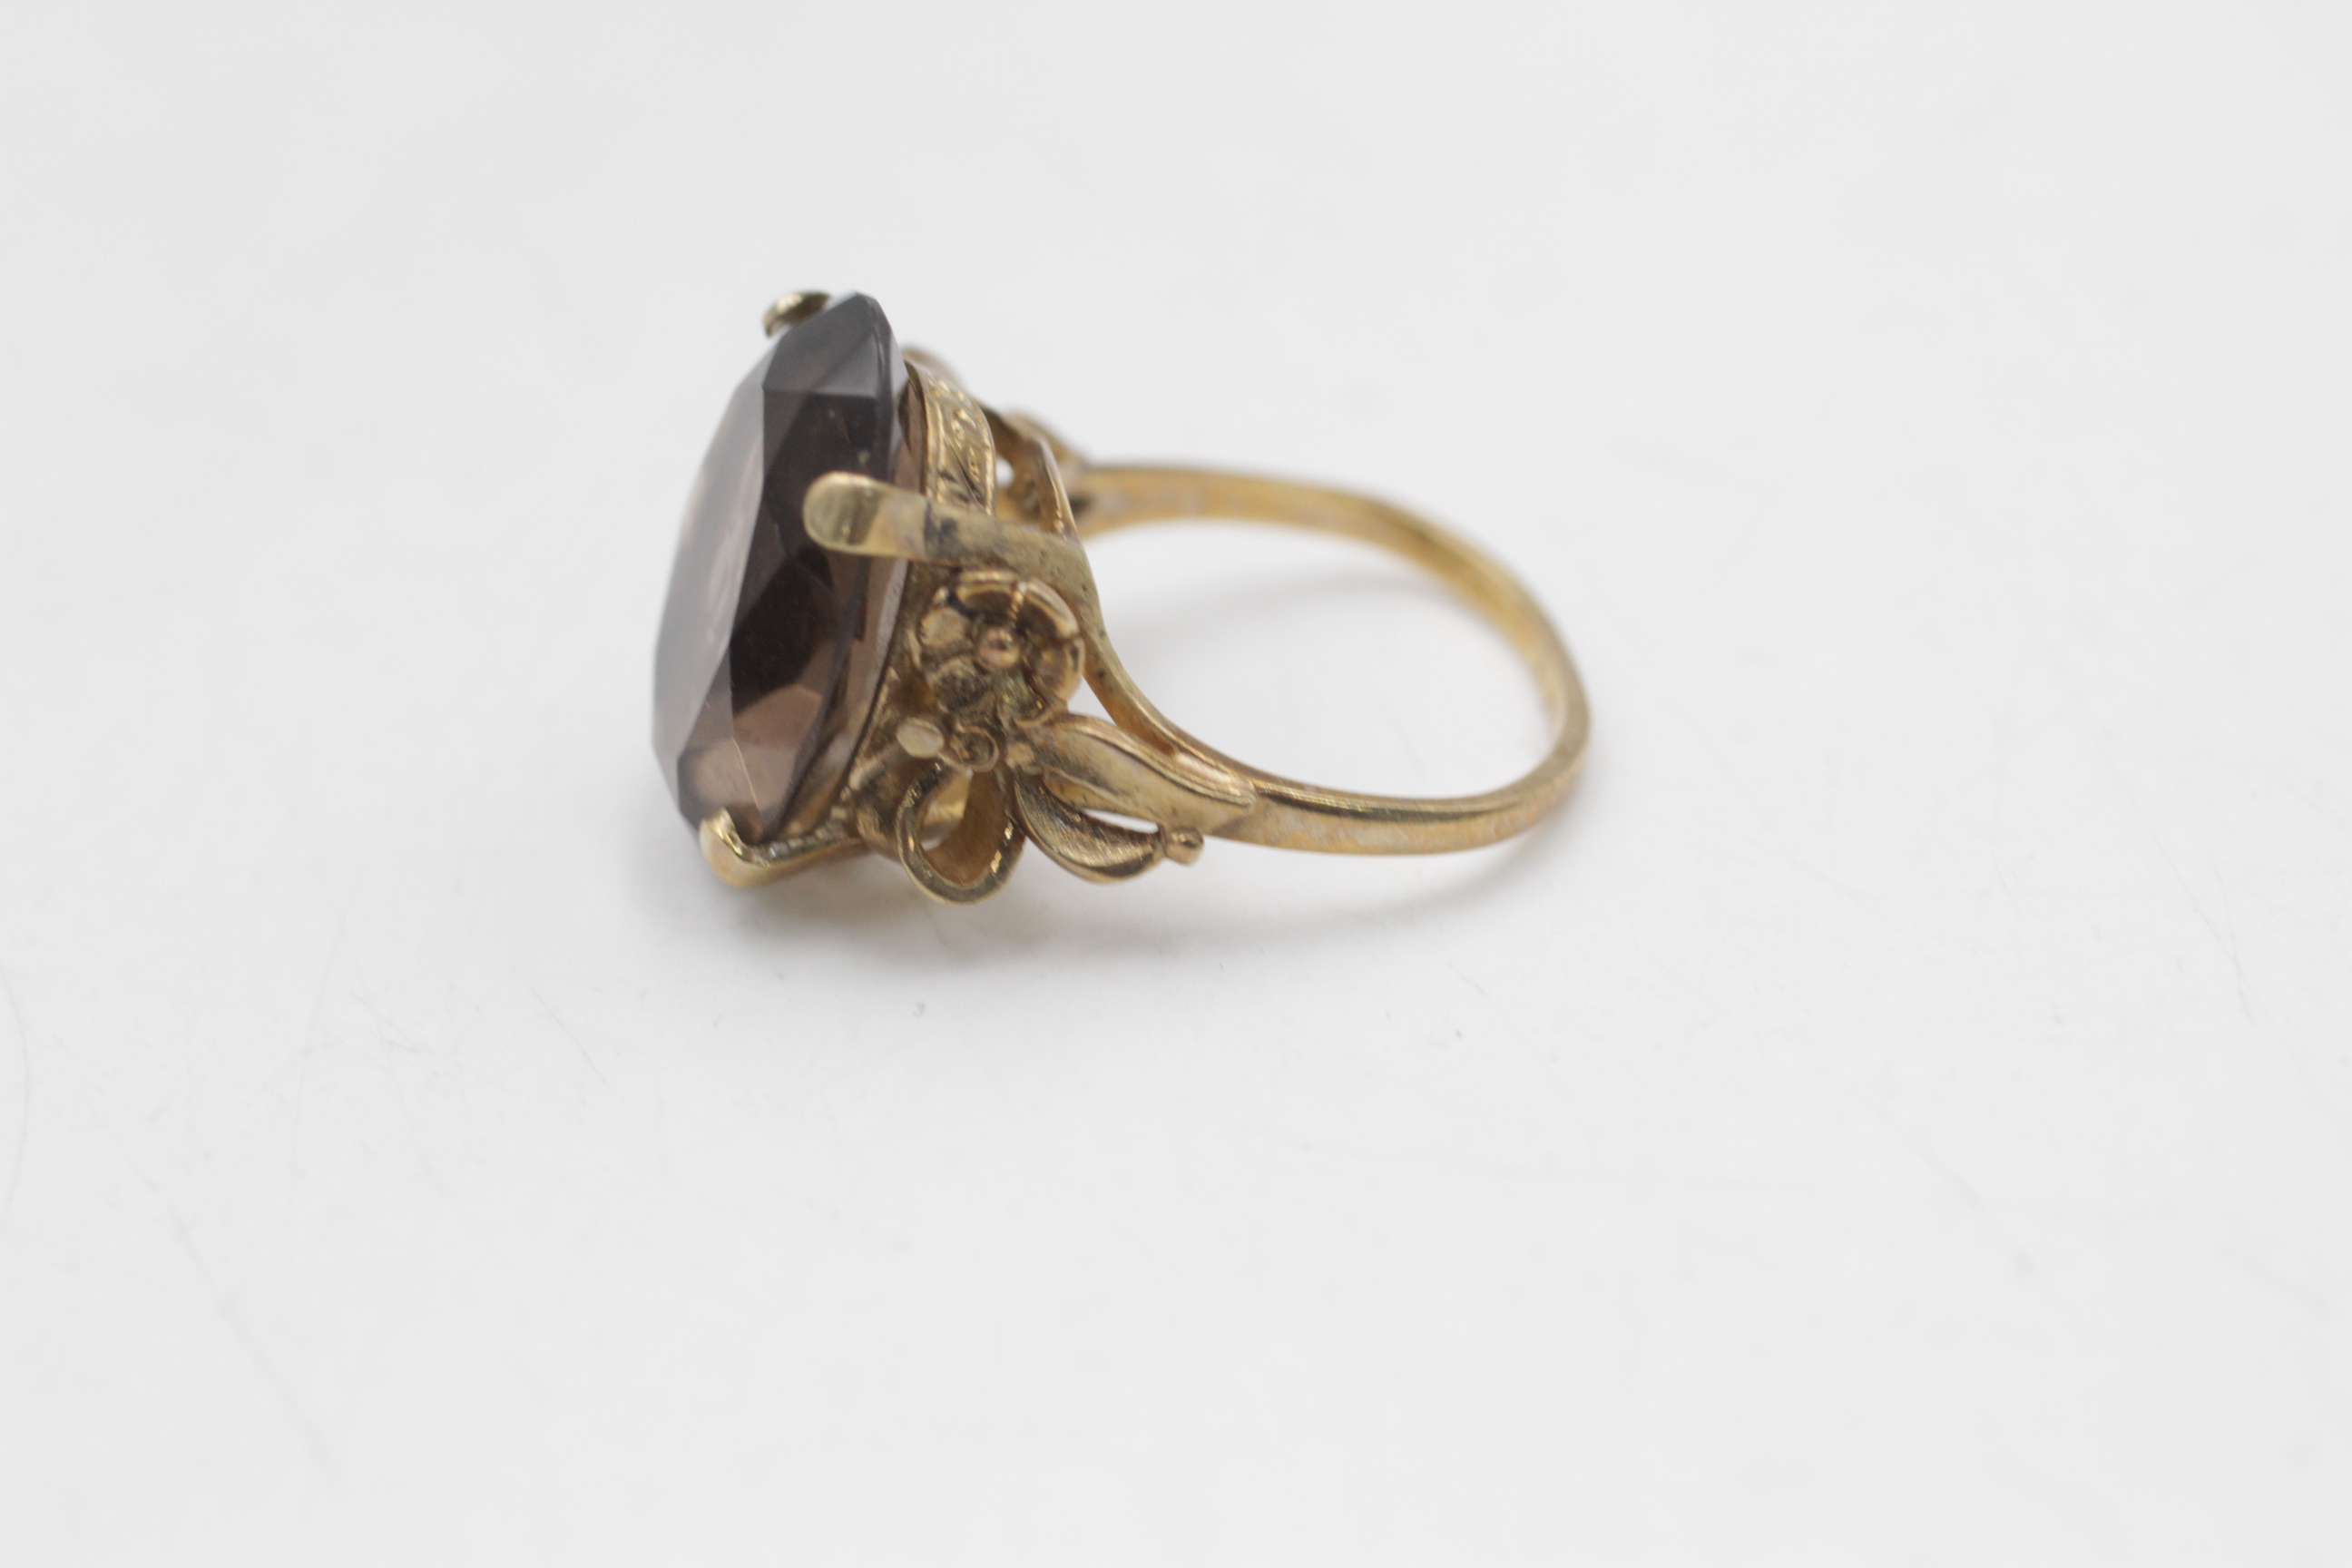 9ct gold vintage smoky quartz solitaire ornate floral setting cocktail ring (5.5g) - Image 2 of 5